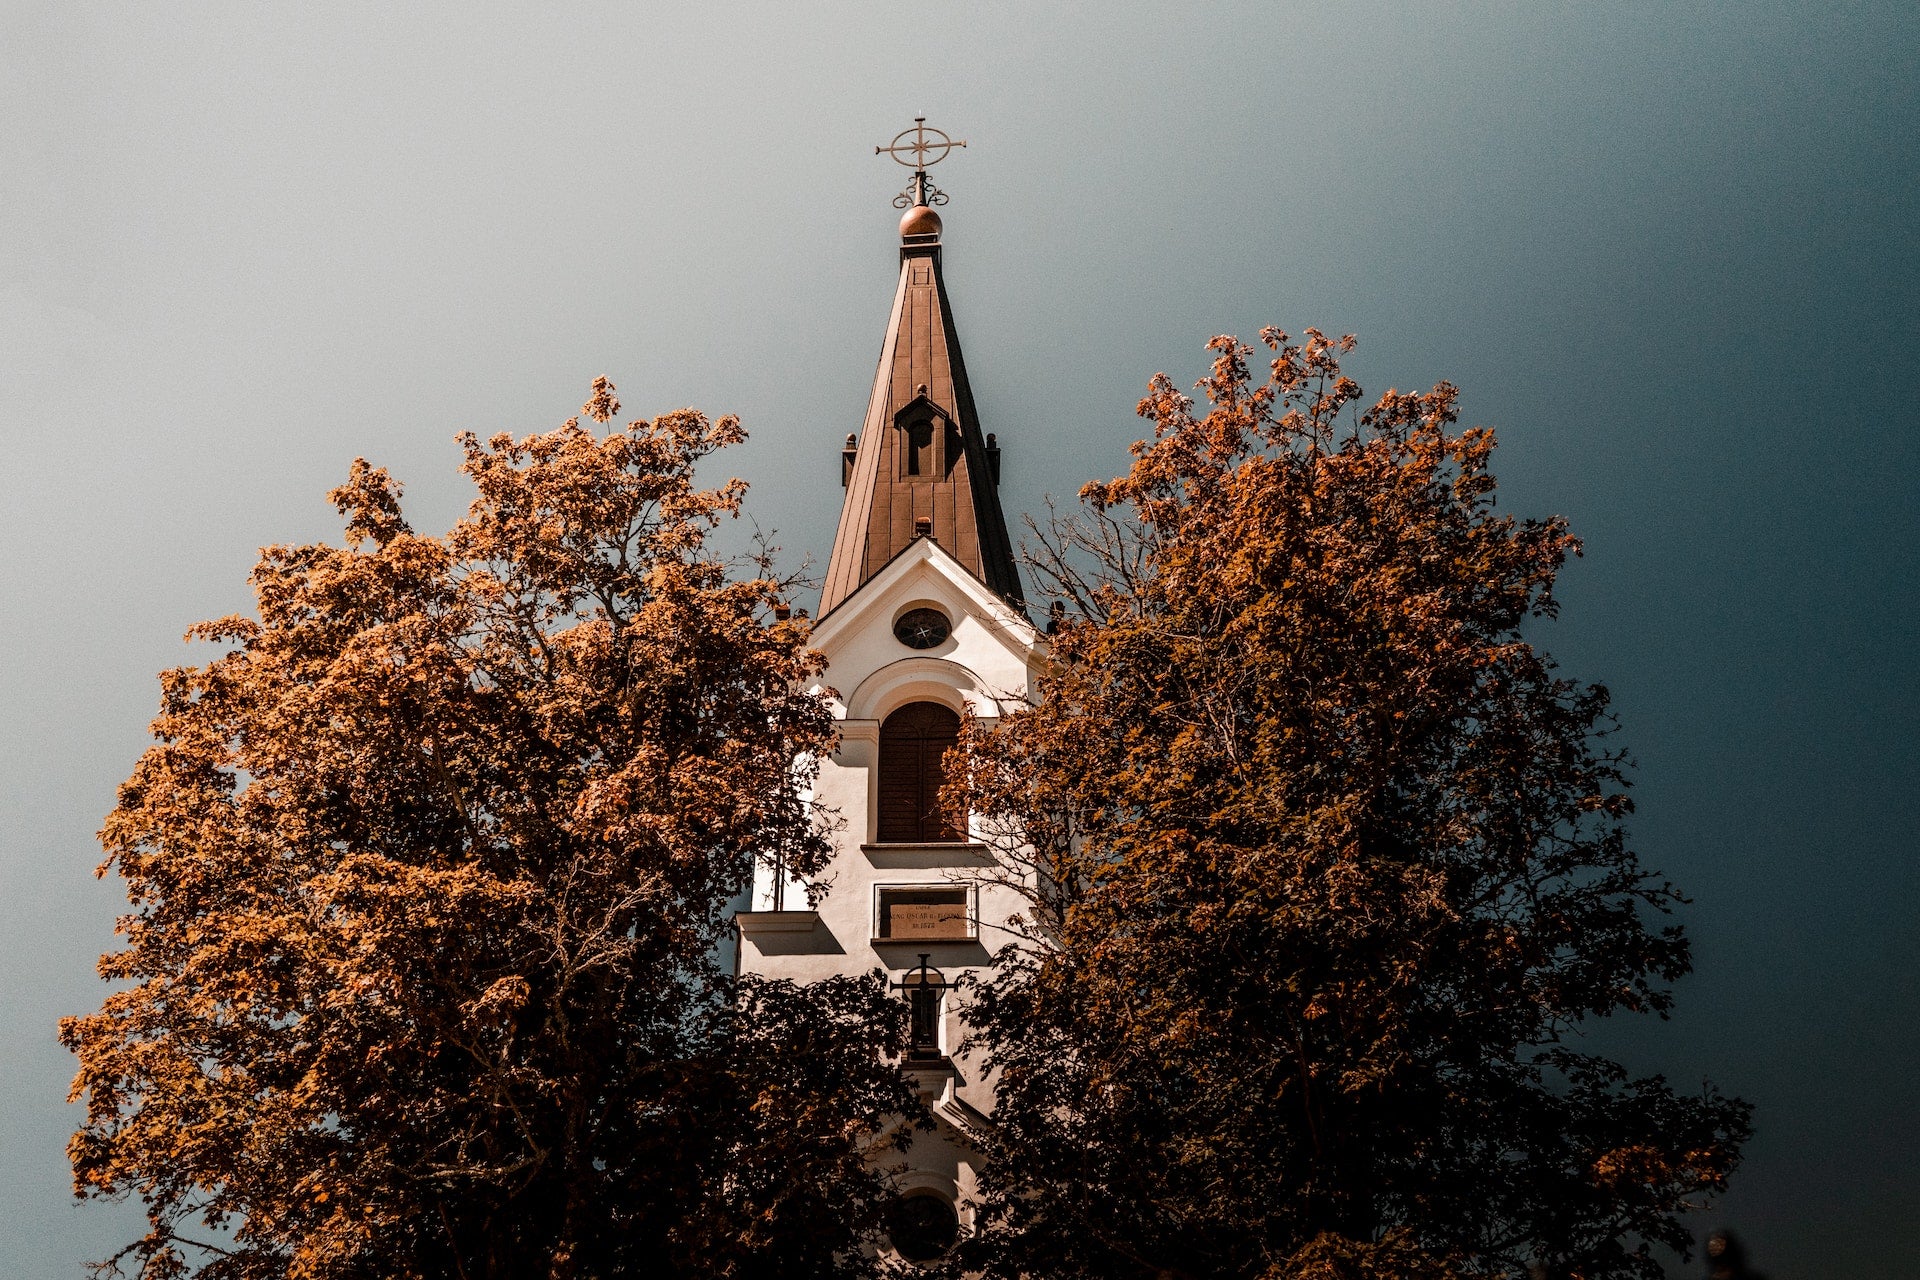 Why Do Some Churches Promote Non-Biblical Beliefs?